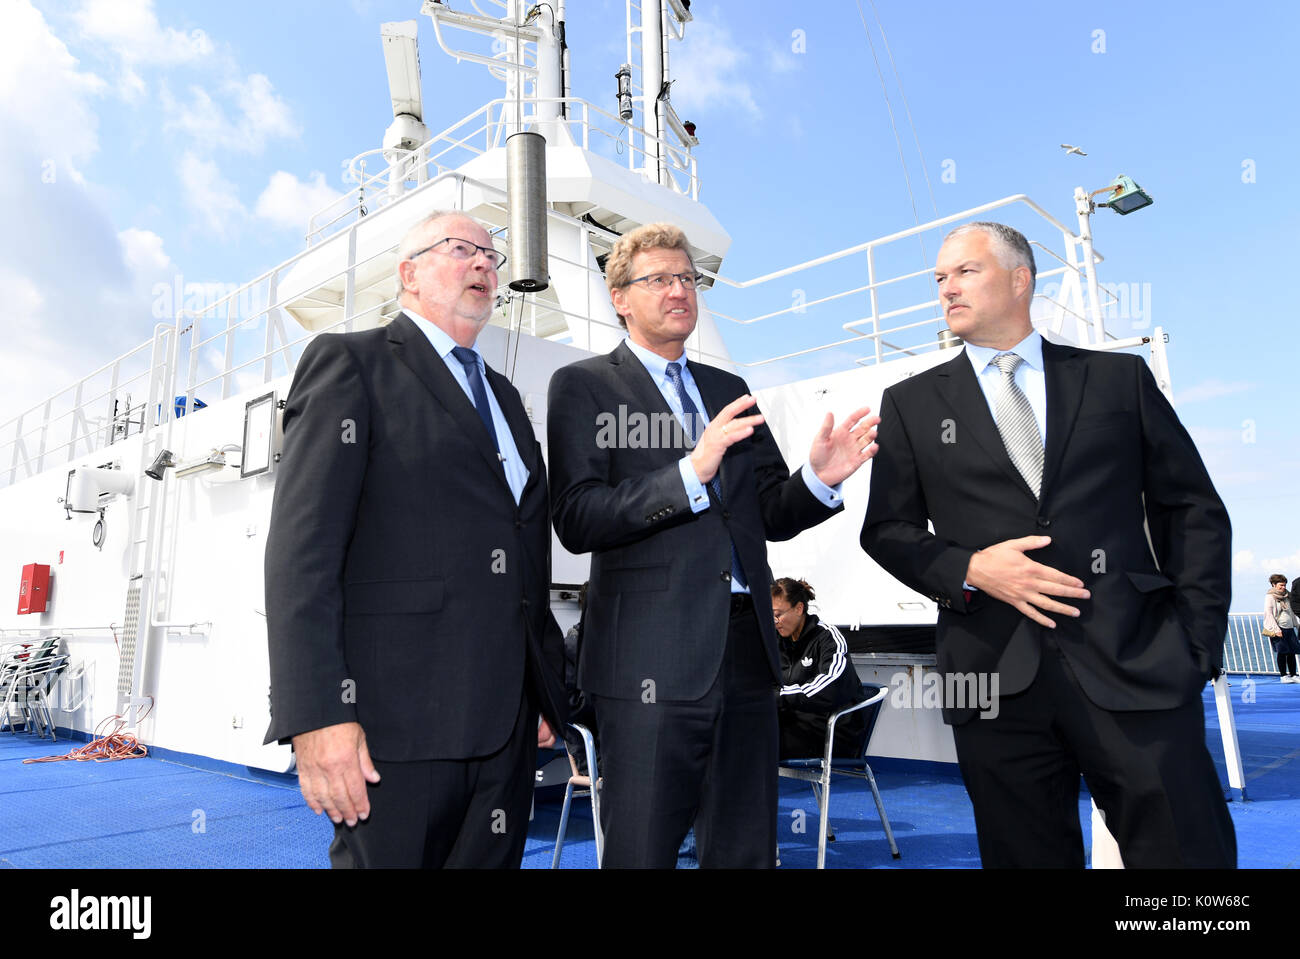 Denmark. 25th August, 2017. The Economy Minister of the state of Schleswig-Holstein, Bernd Buchholz (C), speaking with Senior Captain Johannes Wasmuth (L) and the head of the Scandline, Soren Paulsgaard, aboard the ferry 'Deutschland' traveling between Puttgarden, Germany and Rødbyhavn, Denmark, 25 August 2017. Buchholz had previously met with his Danish counterparts for talks on the Fehmarnbelt tunnel. Photo: Carsten Rehder/dpa/Alamy Live News Stock Photo